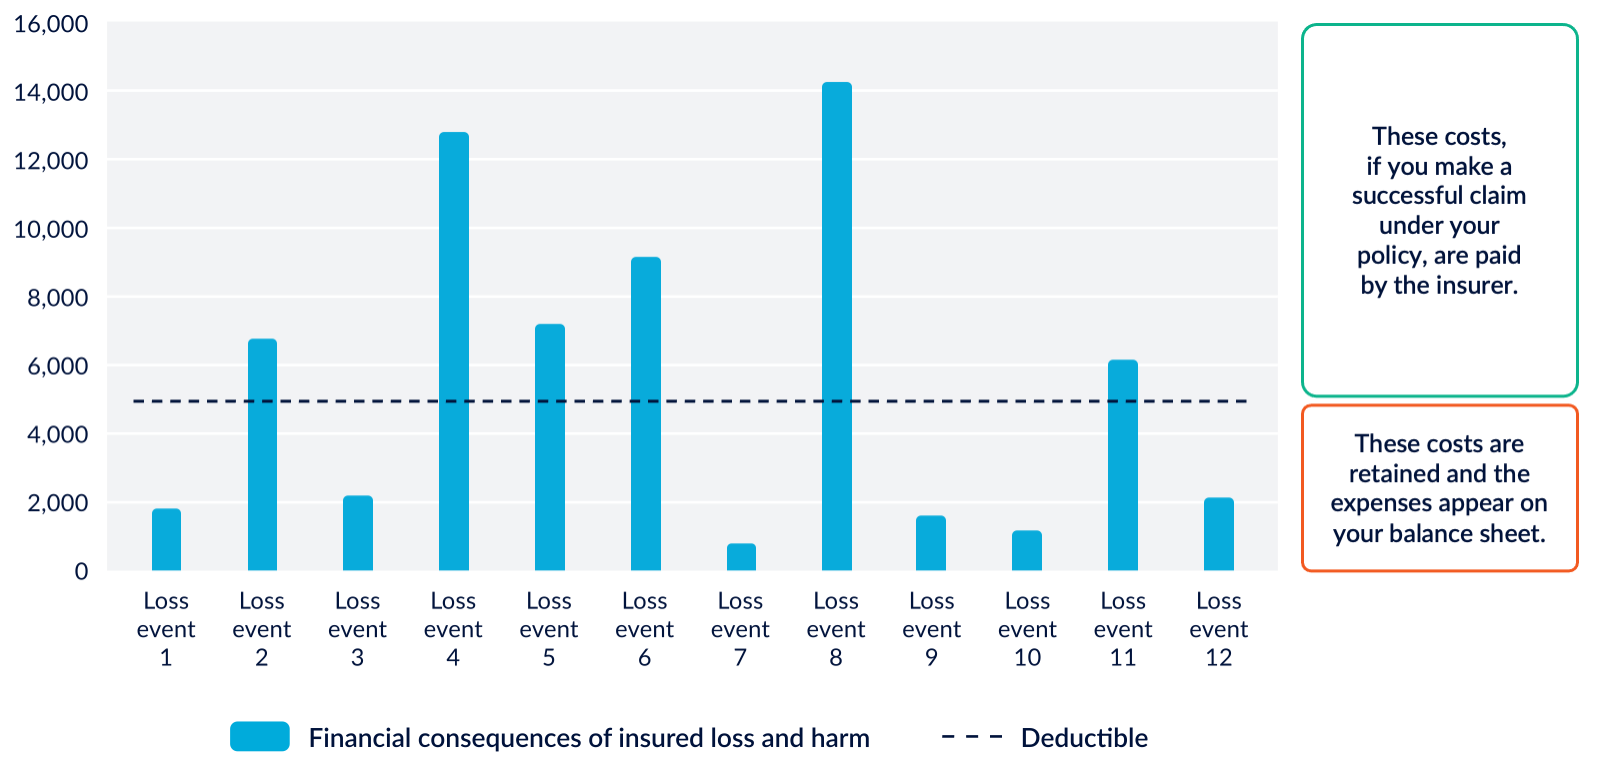 Click to enlarge a graphic example of the financial consequences of insured loss and harm and deductible.   